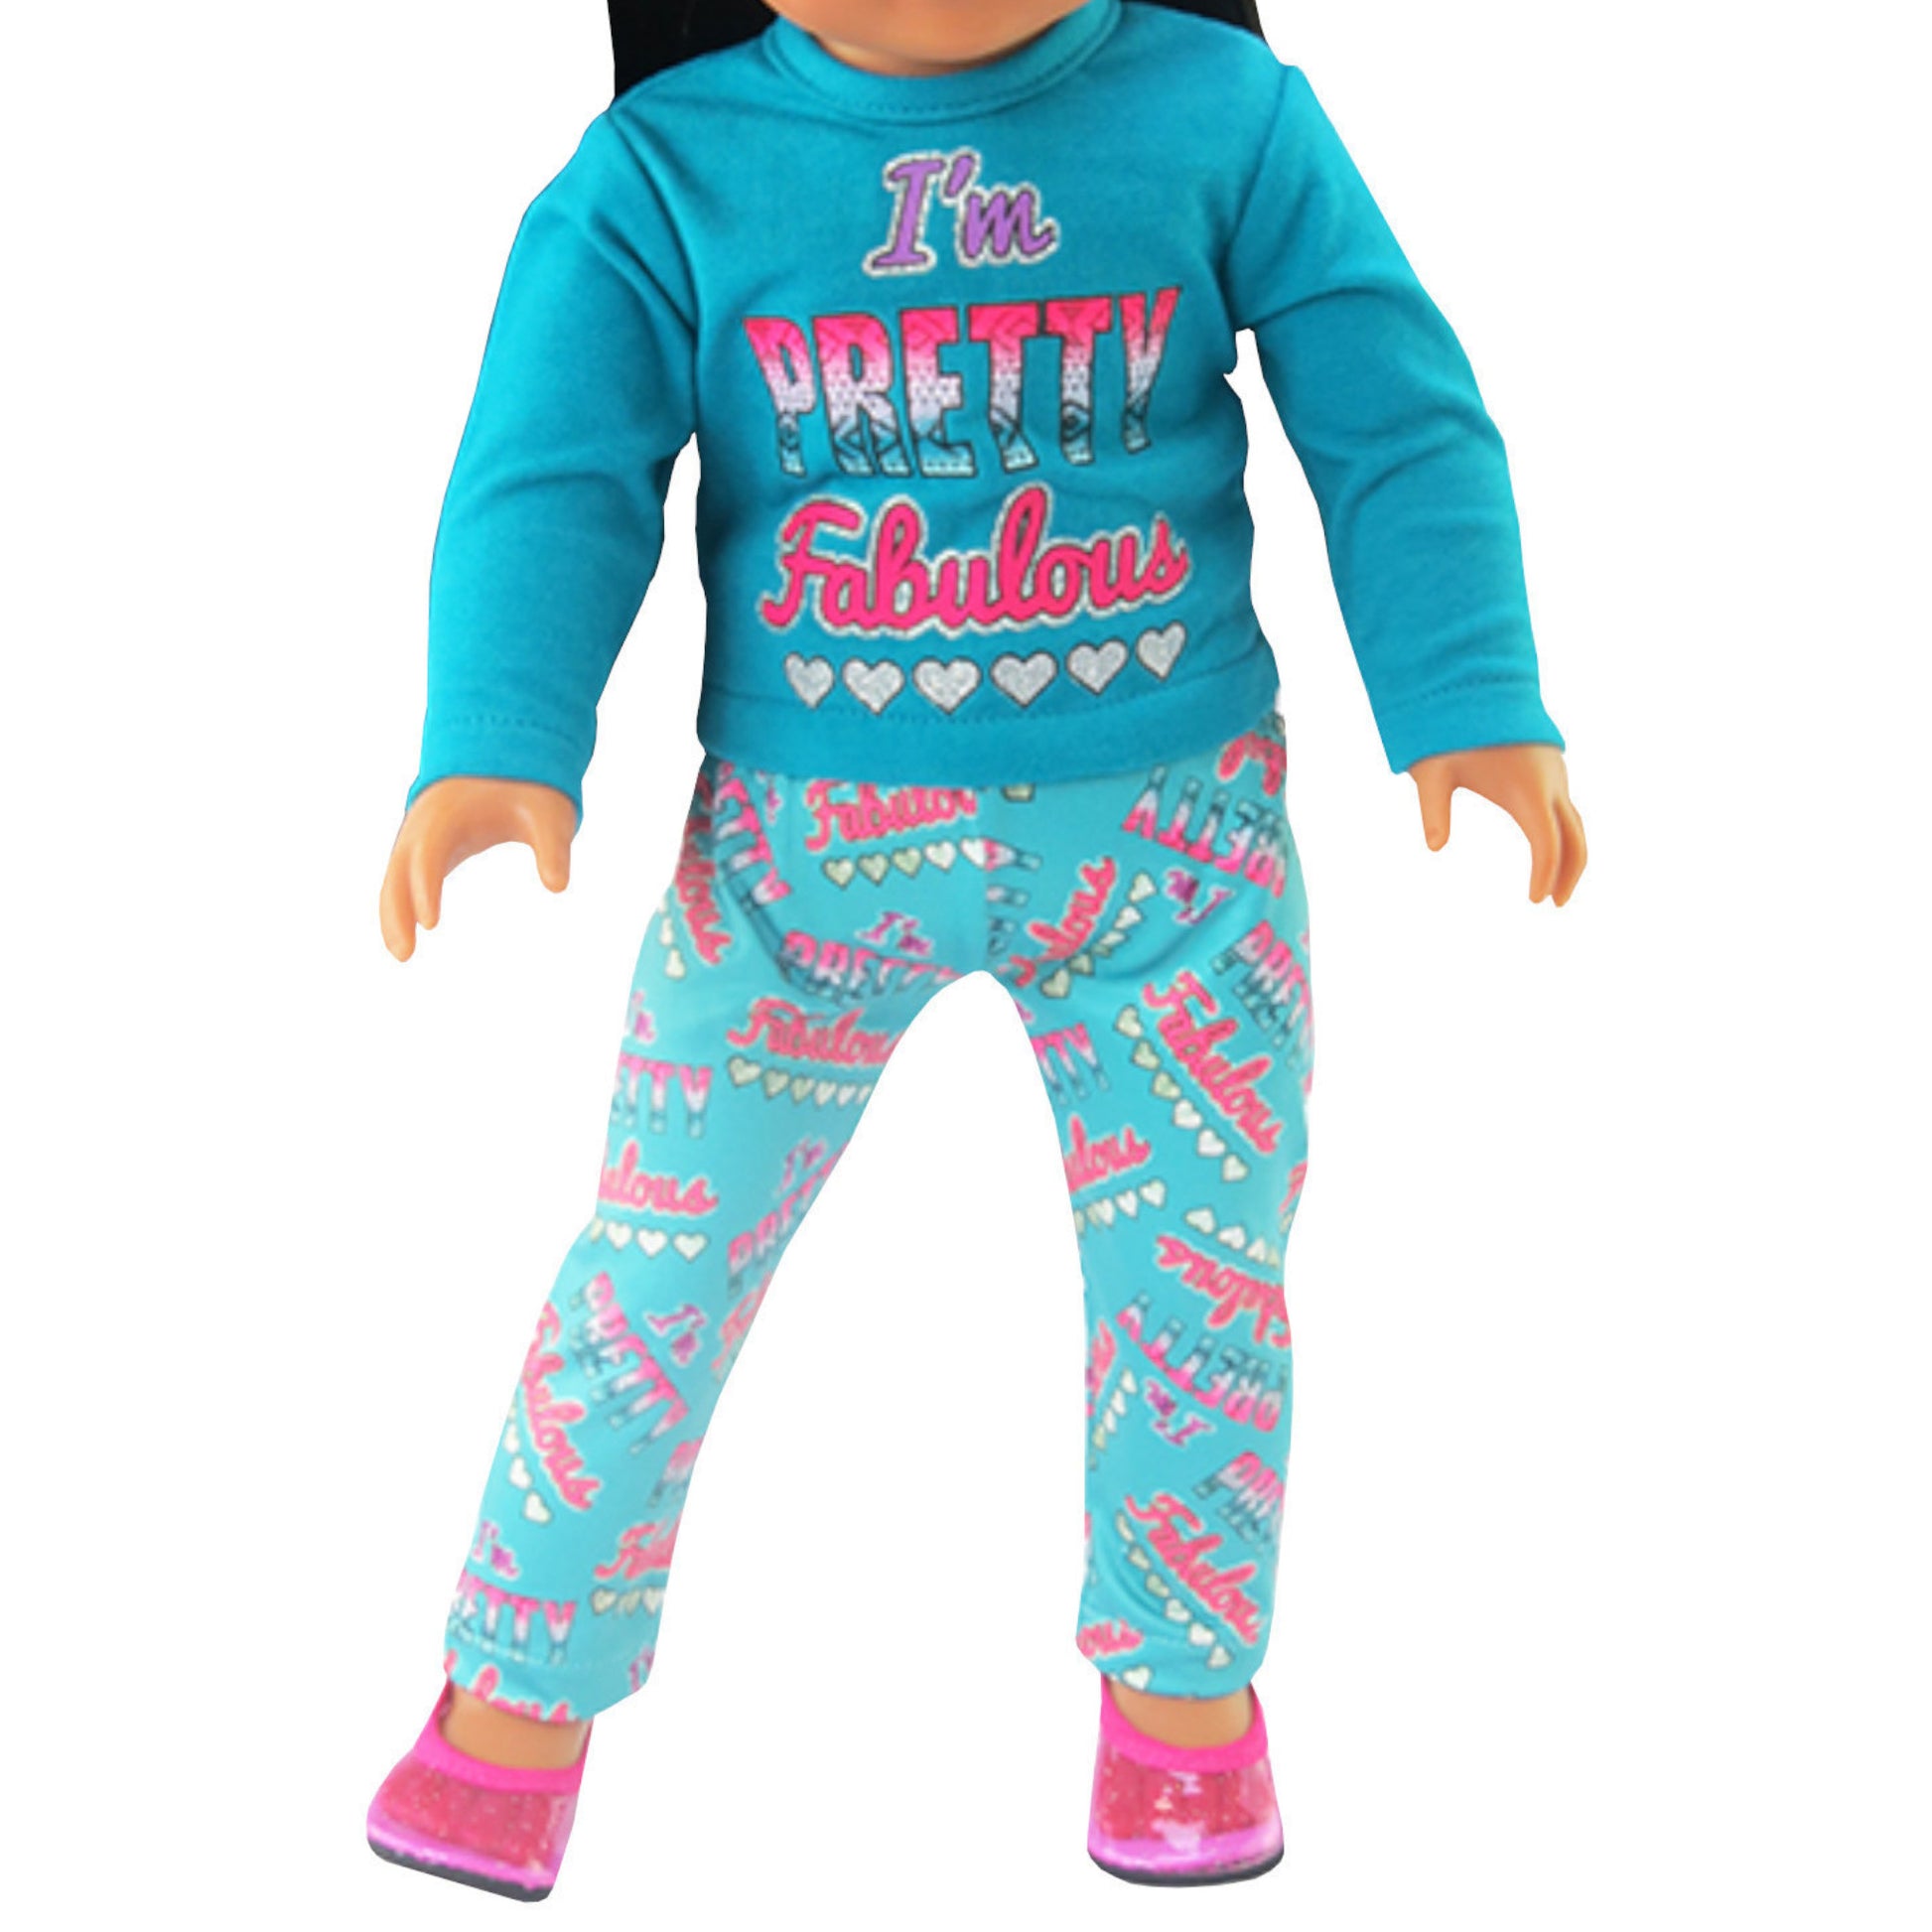 Pretty Fabulous Pant Set for 18-inch dolls with doll